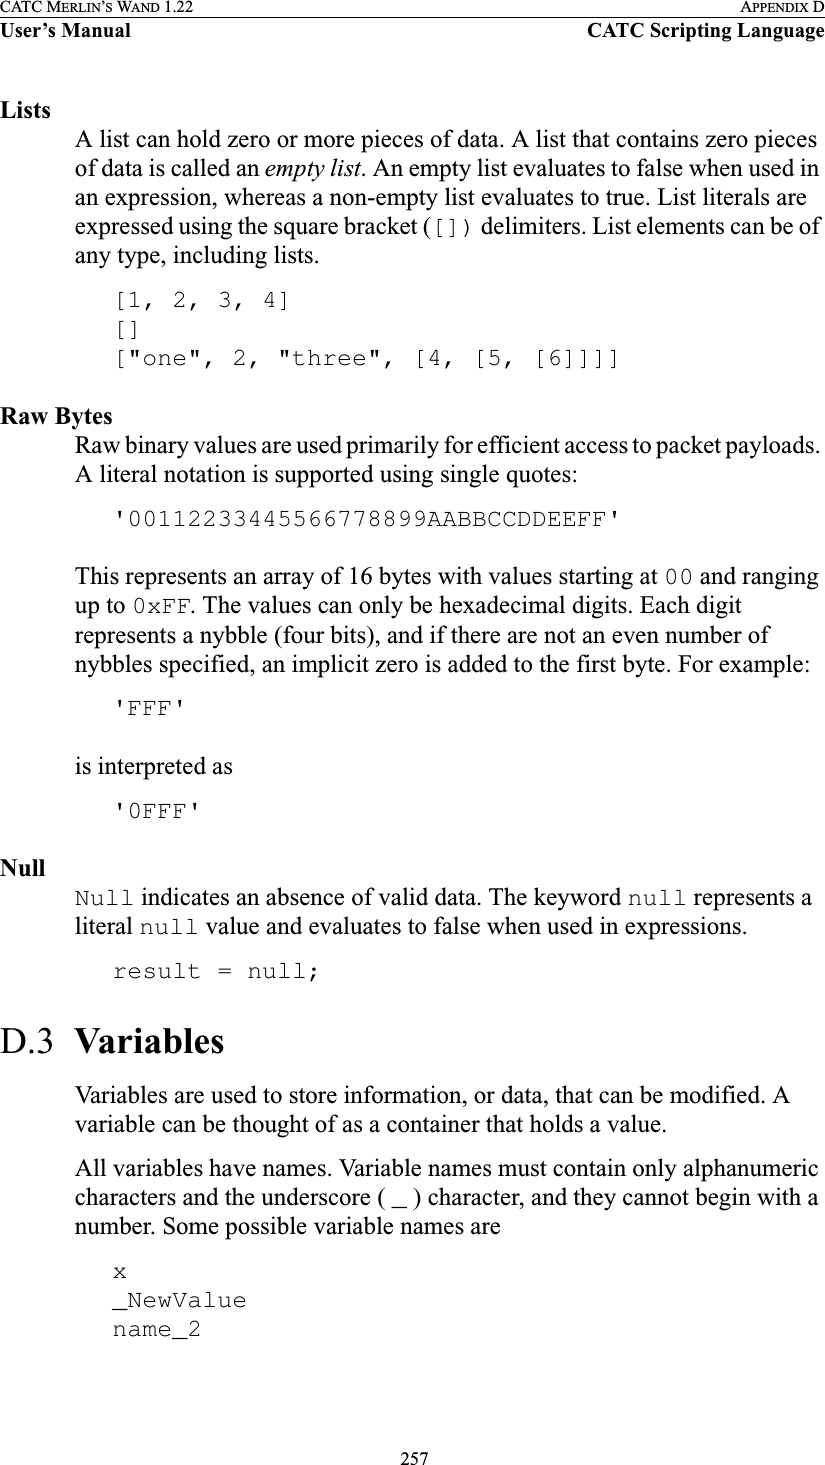  257CATC MERLIN’S WAND 1.22 APPENDIX DUser’s Manual CATC Scripting LanguageListsA list can hold zero or more pieces of data. A list that contains zero pieces of data is called an empty list. An empty list evaluates to false when used in an expression, whereas a non-empty list evaluates to true. List literals are expressed using the square bracket ([]) delimiters. List elements can be of any type, including lists.[1, 2, 3, 4][][&quot;one&quot;, 2, &quot;three&quot;, [4, [5, [6]]]]Raw BytesRaw binary values are used primarily for efficient access to packet payloads. A literal notation is supported using single quotes:&apos;00112233445566778899AABBCCDDEEFF&apos;This represents an array of 16 bytes with values starting at 00 and ranging up to 0xFF. The values can only be hexadecimal digits. Each digit represents a nybble (four bits), and if there are not an even number of nybbles specified, an implicit zero is added to the first byte. For example:&apos;FFF&apos;is interpreted as&apos;0FFF&apos;NullNull indicates an absence of valid data. The keyword null represents a literal null value and evaluates to false when used in expressions.result = null;D.3  VariablesVariables are used to store information, or data, that can be modified. A variable can be thought of as a container that holds a value.All variables have names. Variable names must contain only alphanumeric characters and the underscore ( _ ) character, and they cannot begin with a number. Some possible variable names arex_NewValuename_2